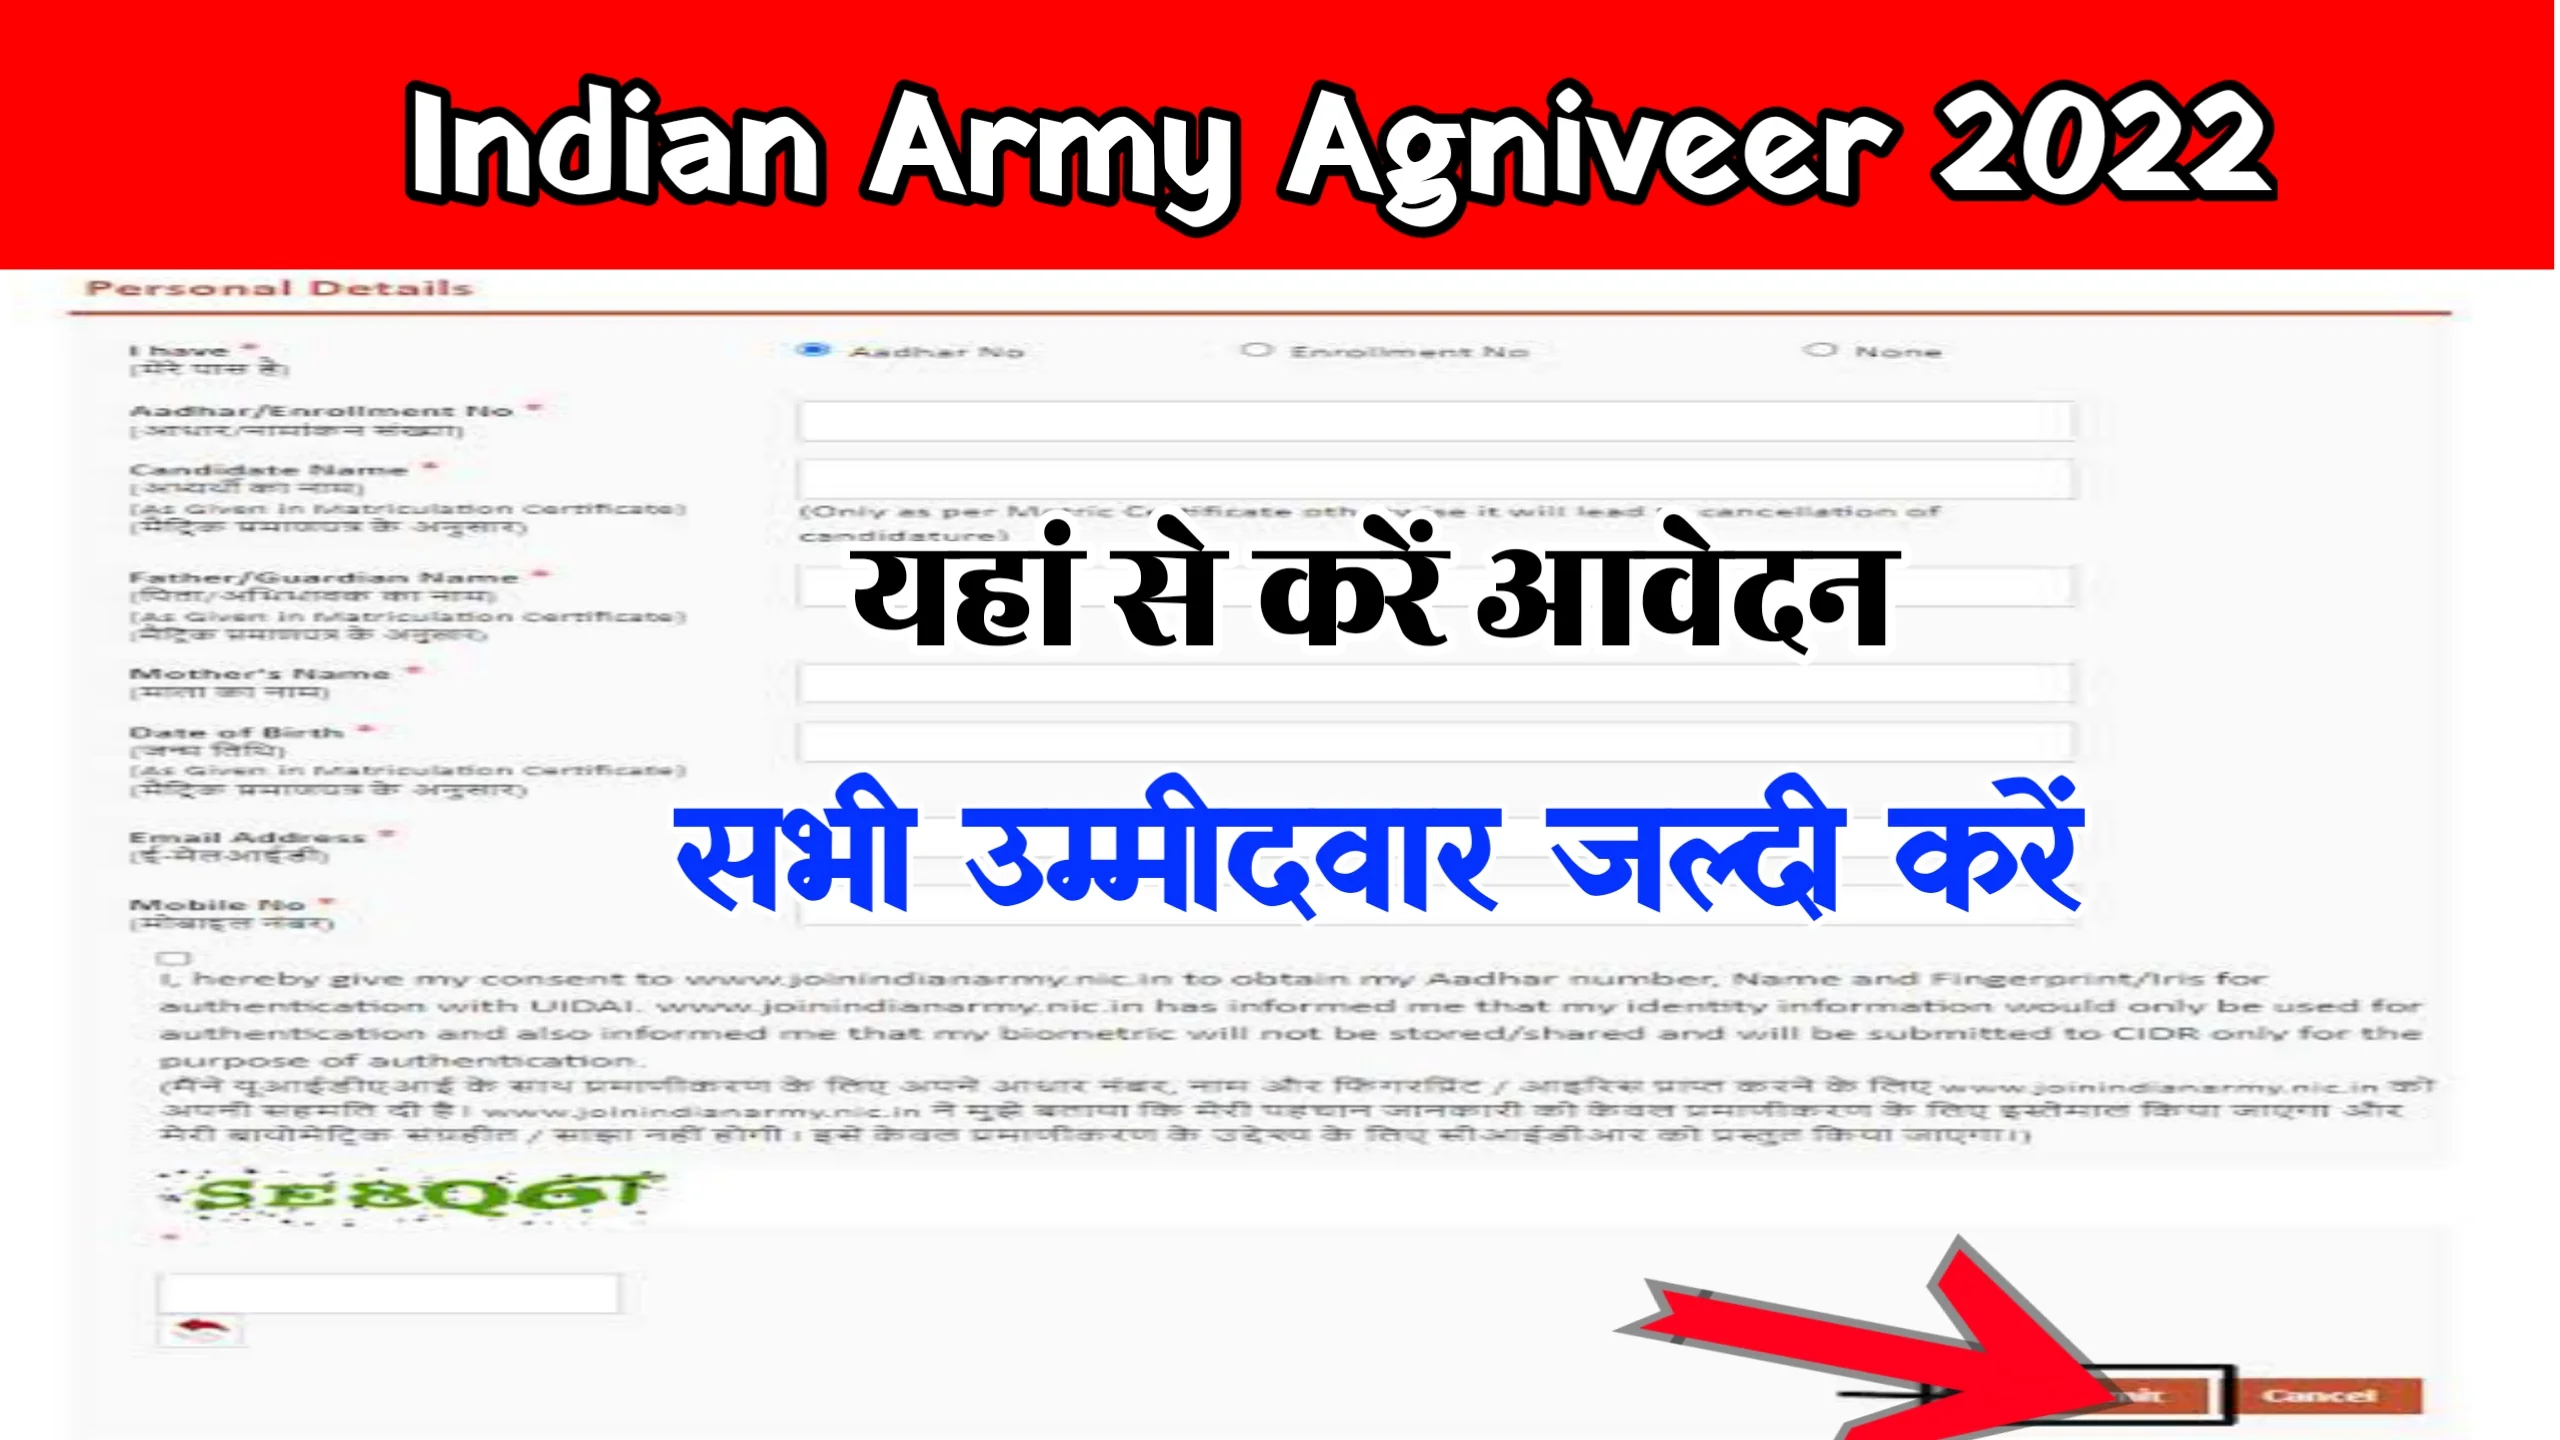 Indian Army Agniveer Apply Online 2022 : Recruitment @joinindianarmy.nic.in